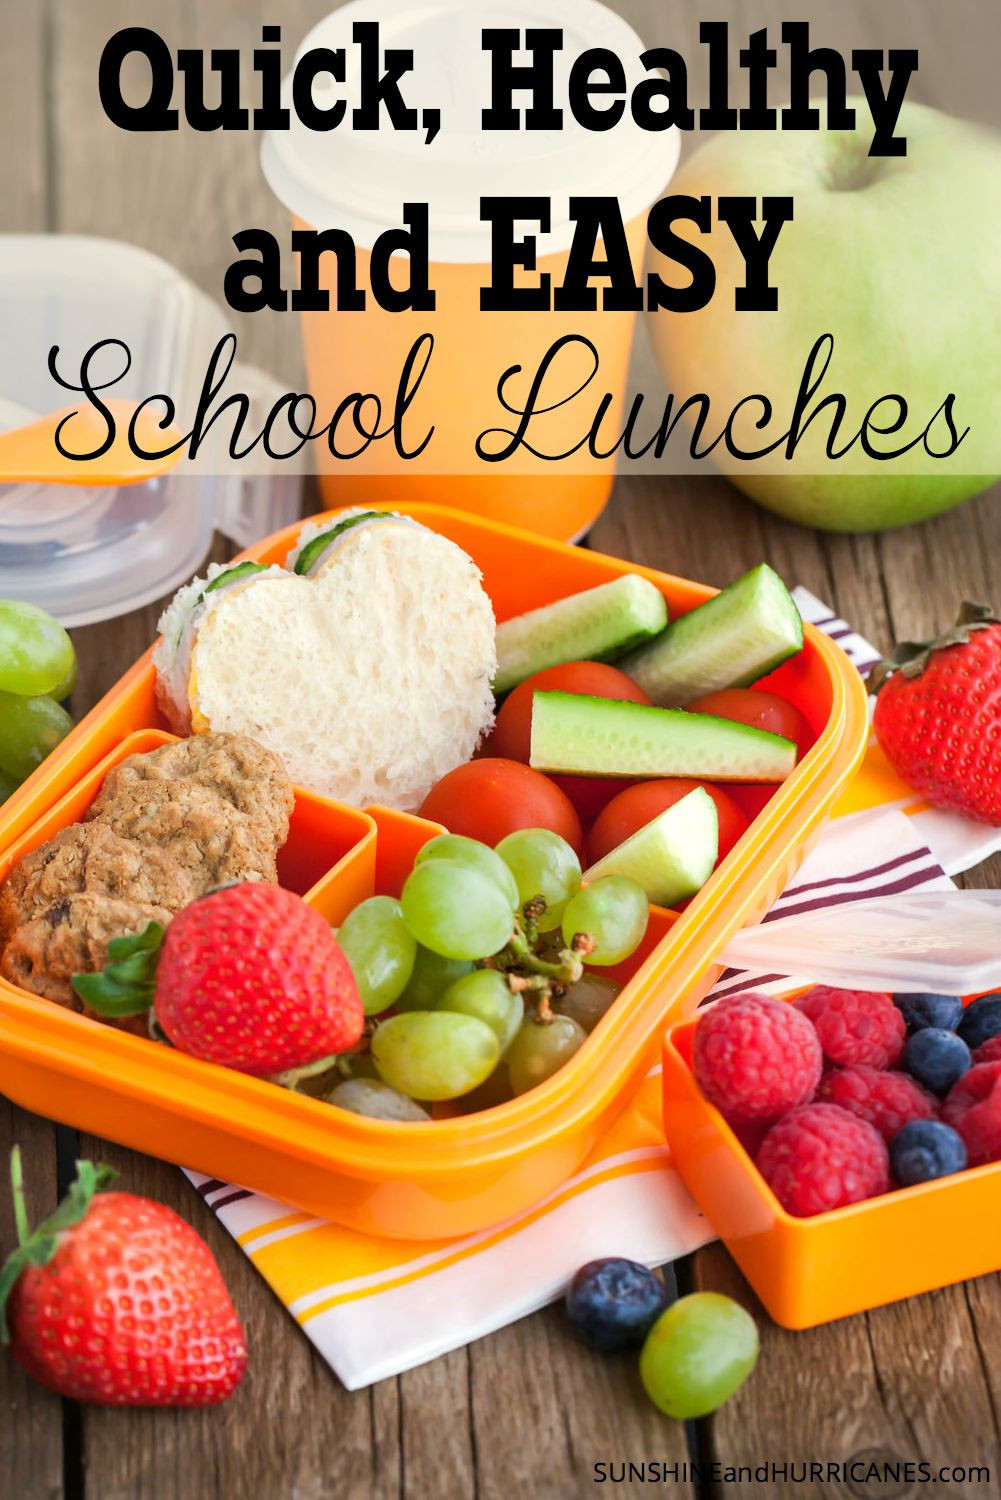 Quick Healthy Lunches For School
 Healthy Quick and Easy School Lunches